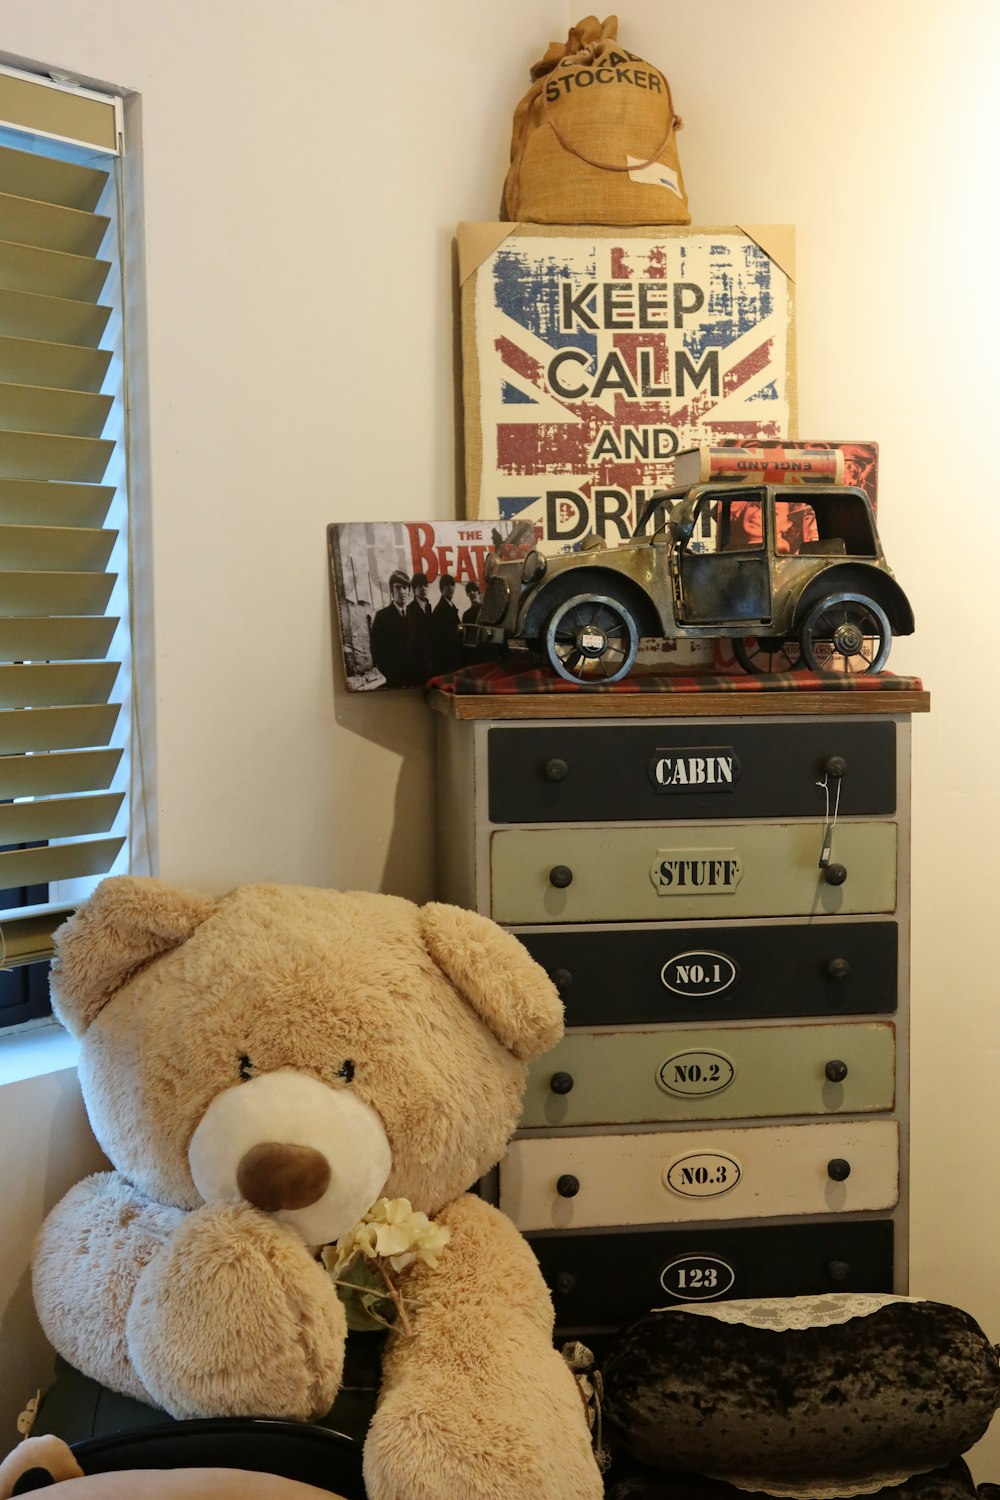 a teddy bear sitting on top of a chest of drawers